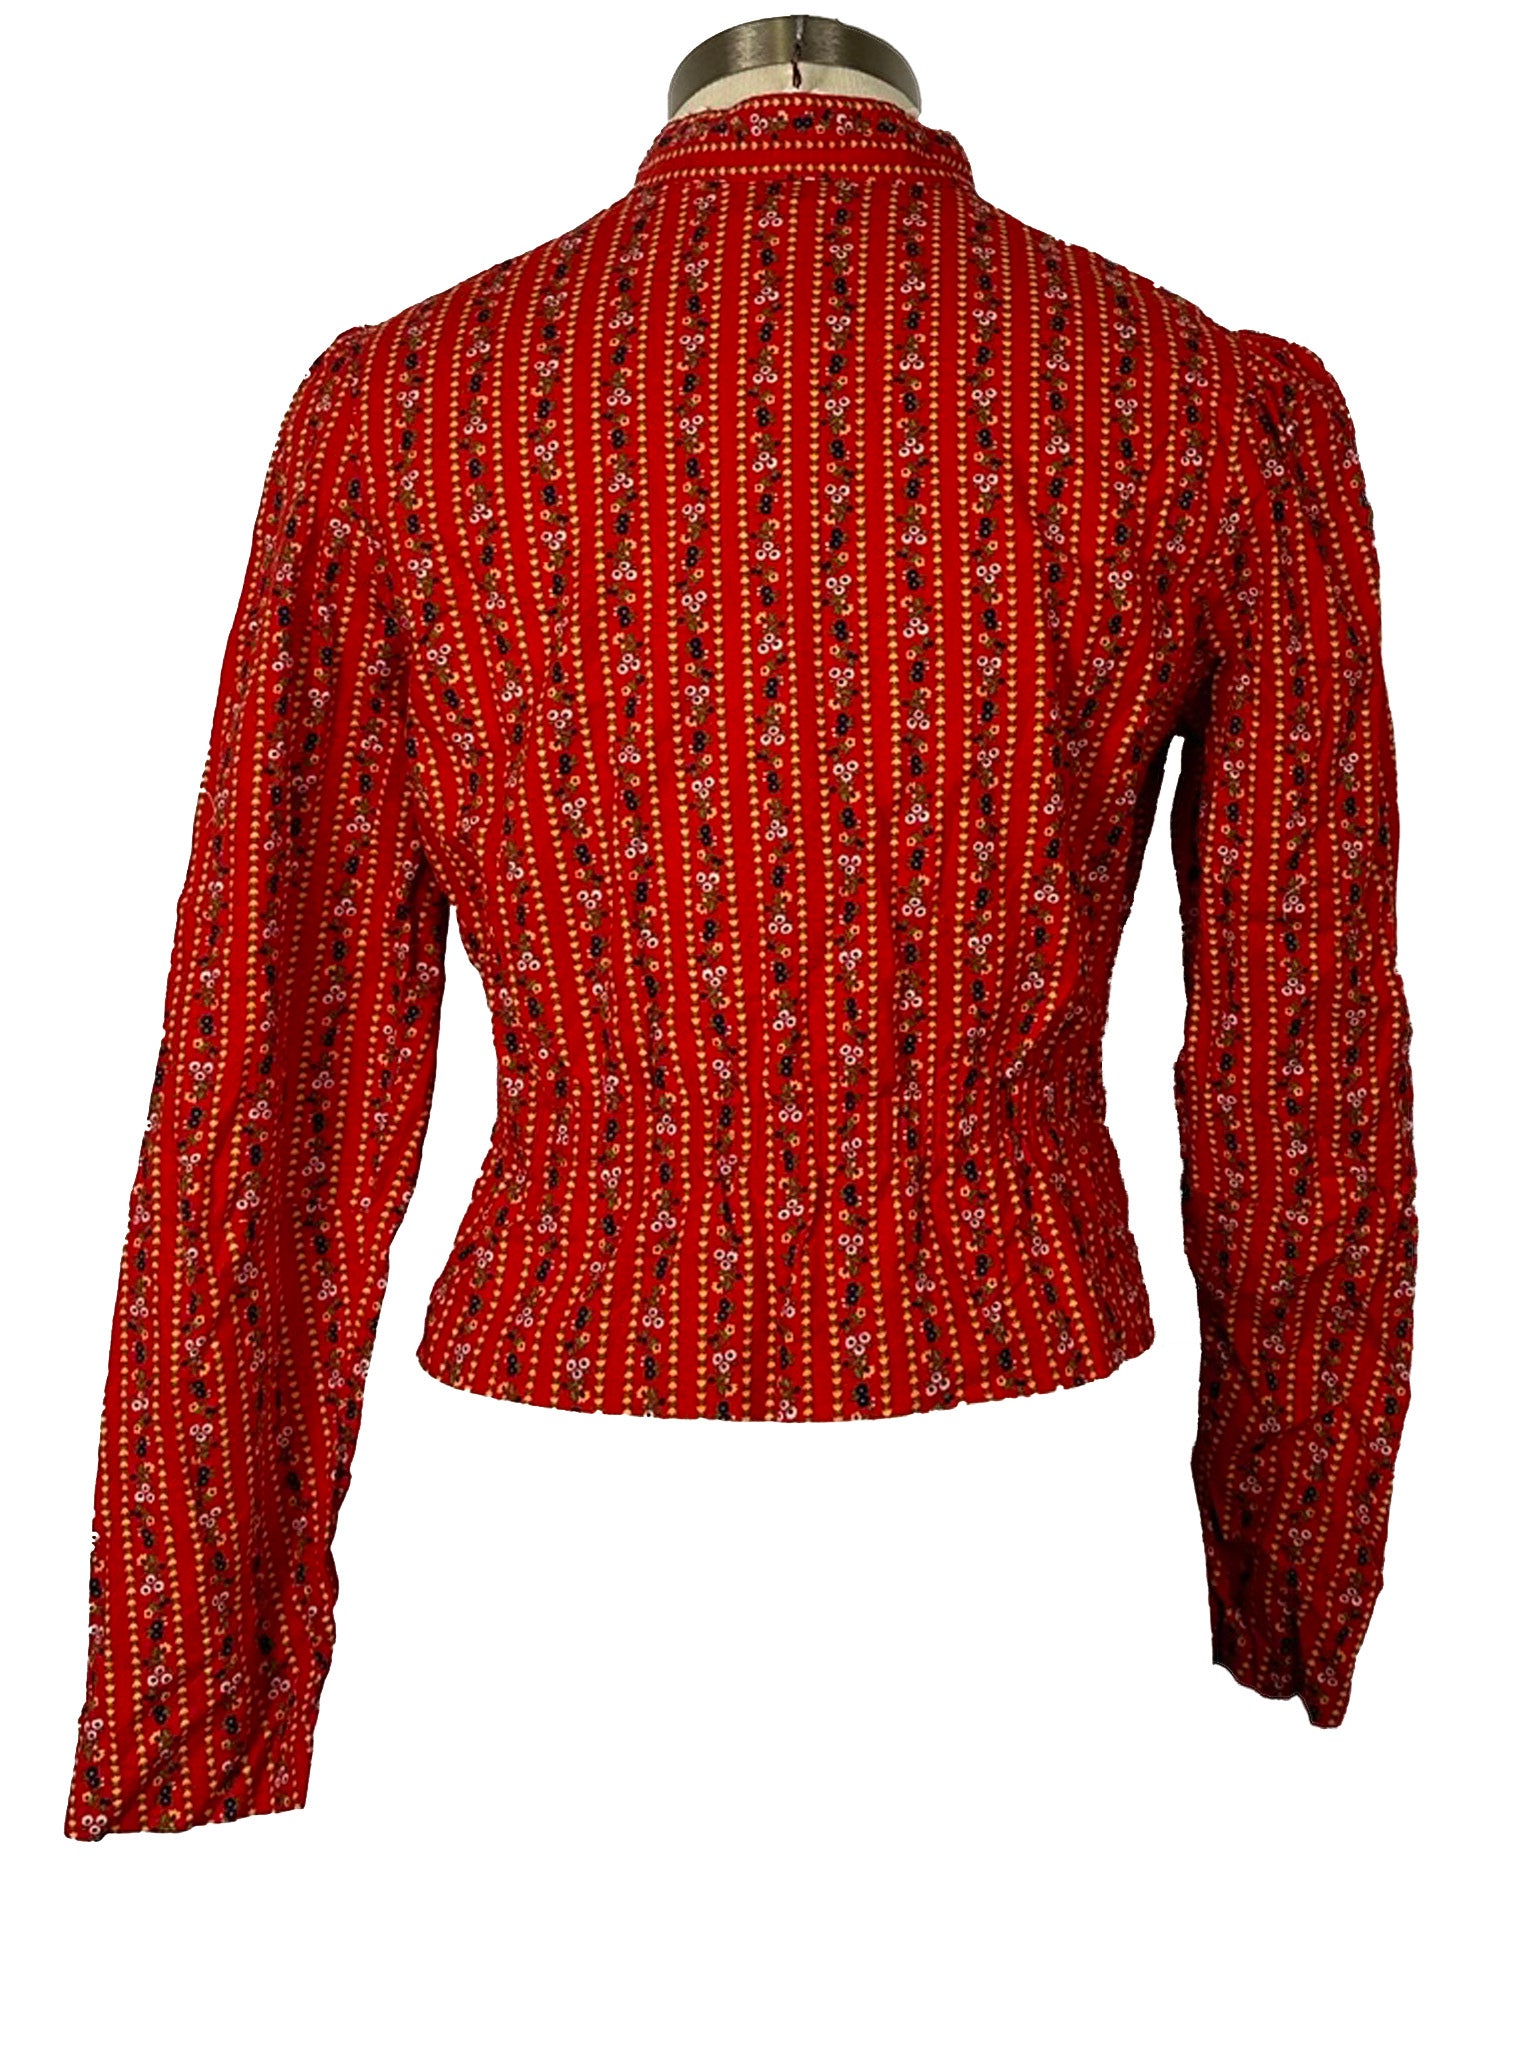 Turtle Bax Vintage Red Full Sleeve Princess Blouse Women's Size 13/14